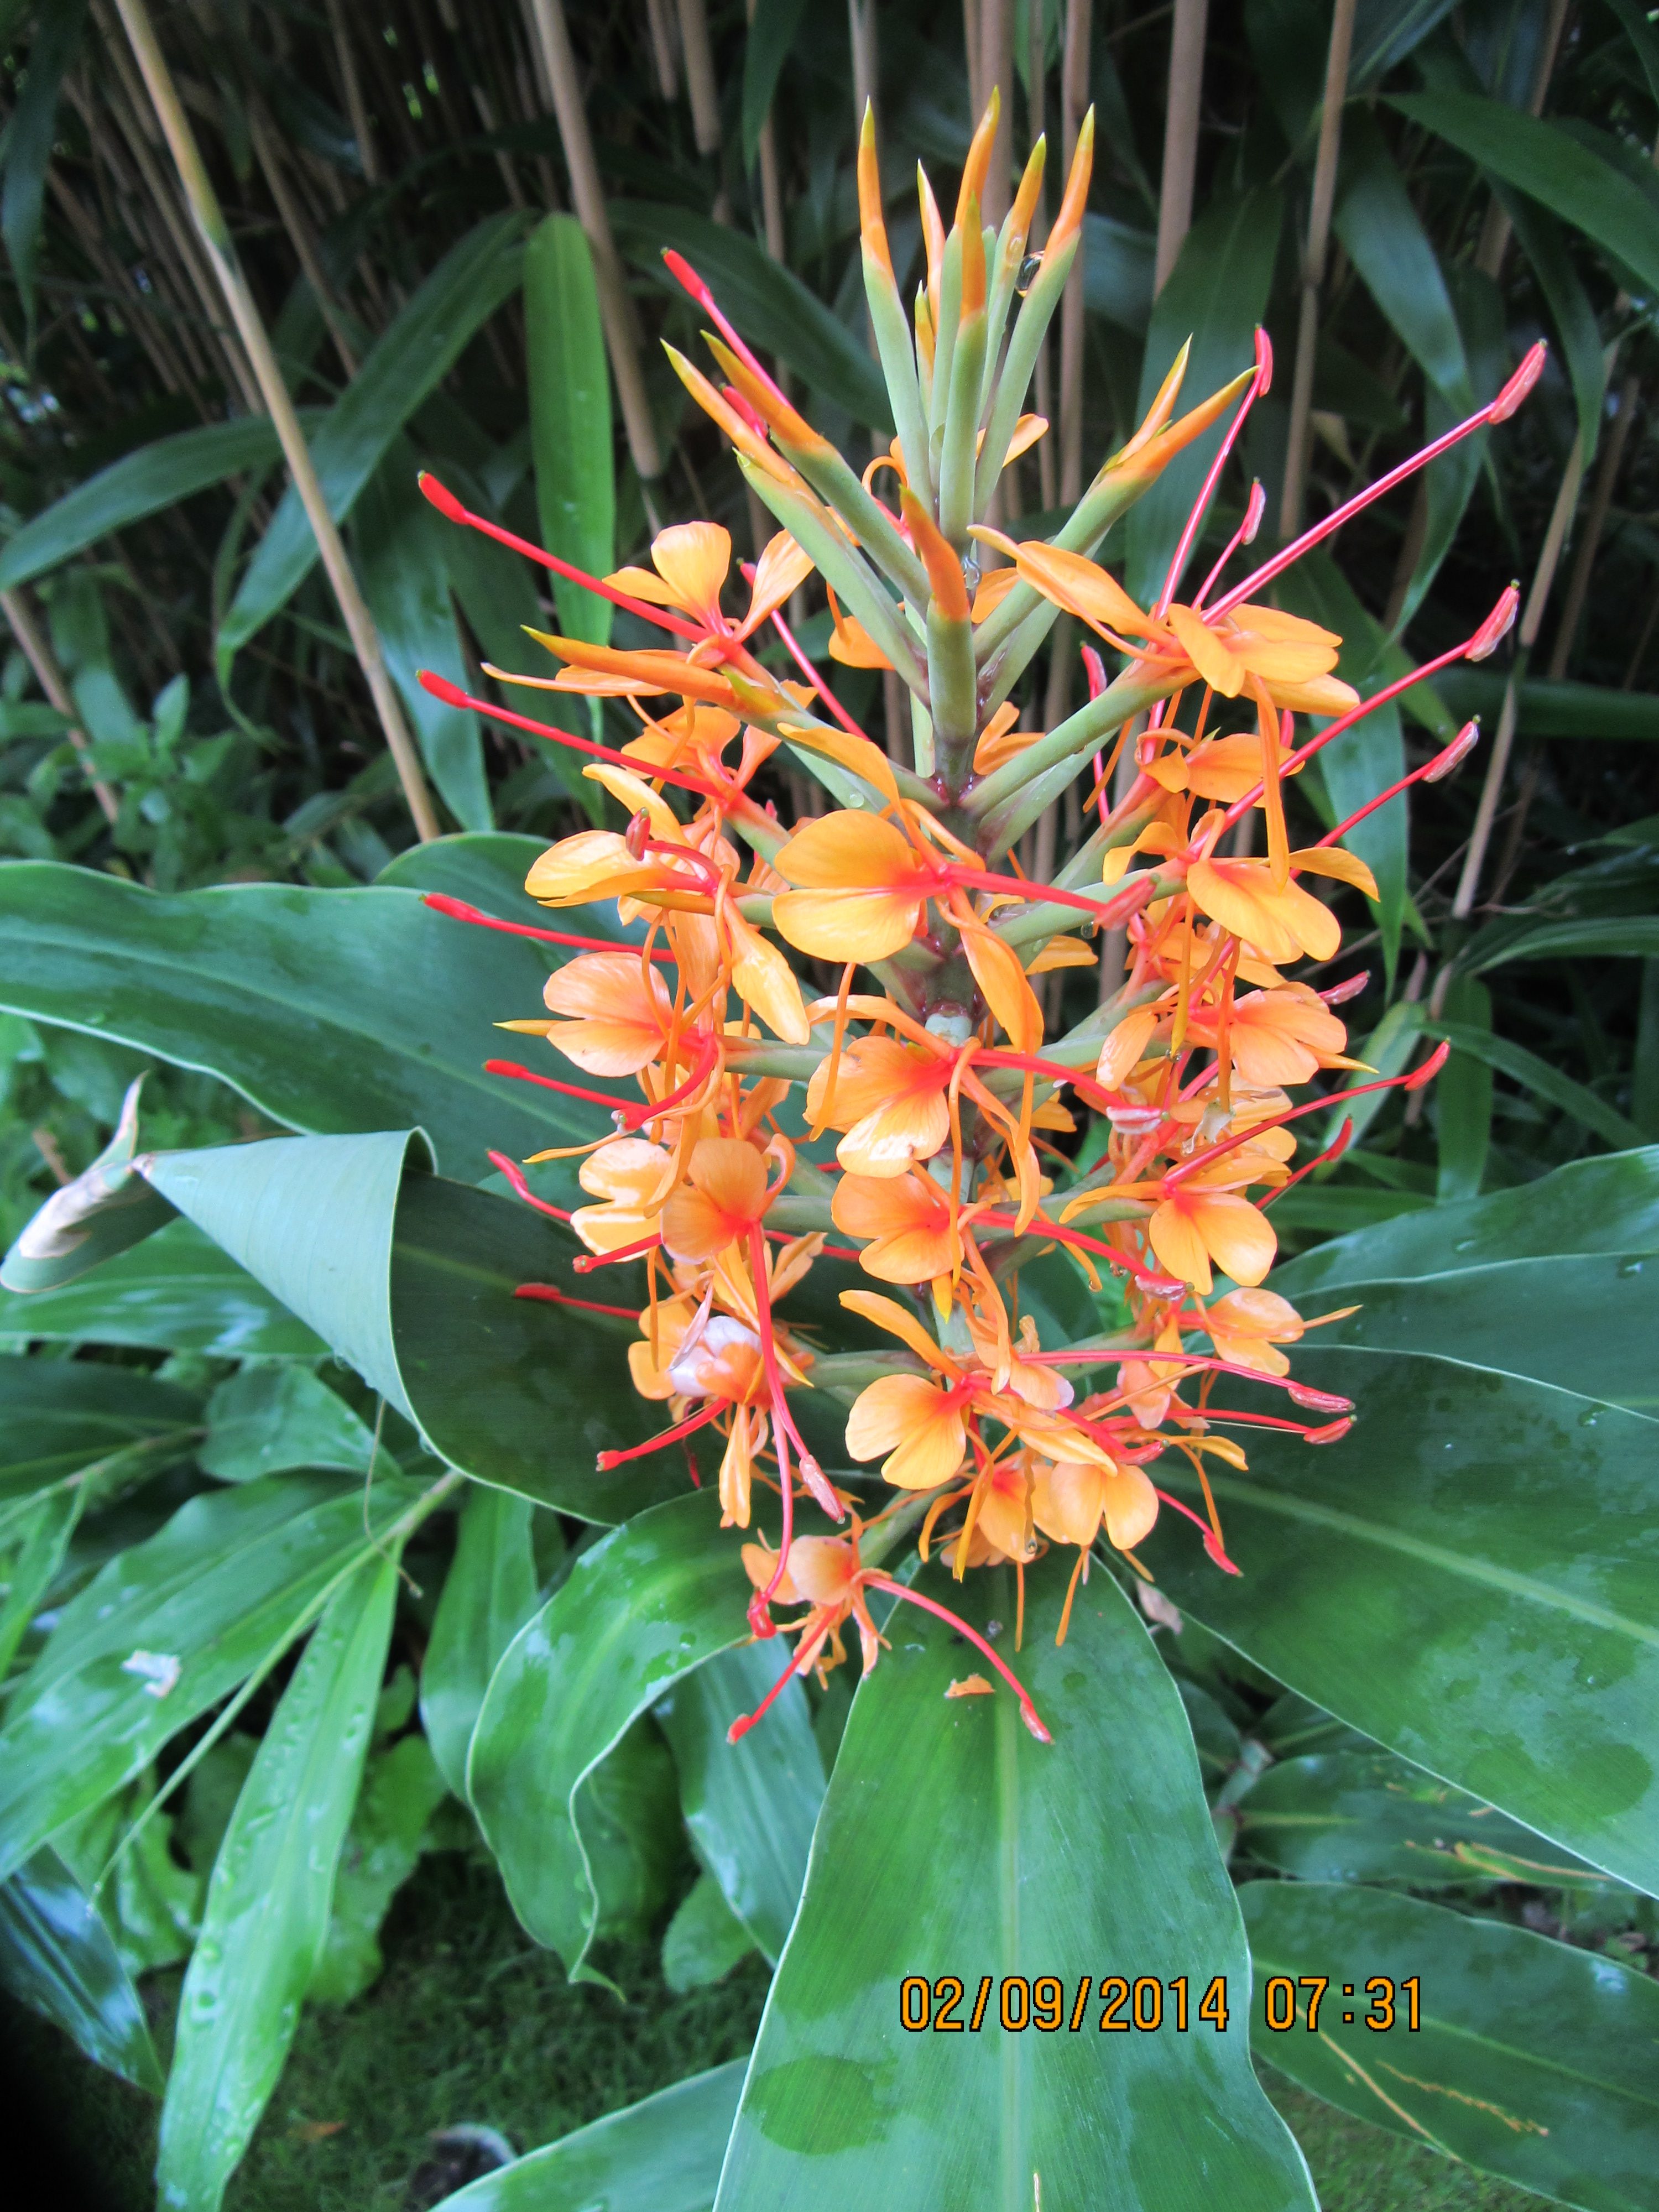 Hedychium, probably densiflorum, maybe 'Tara'. Willing to be corrected!